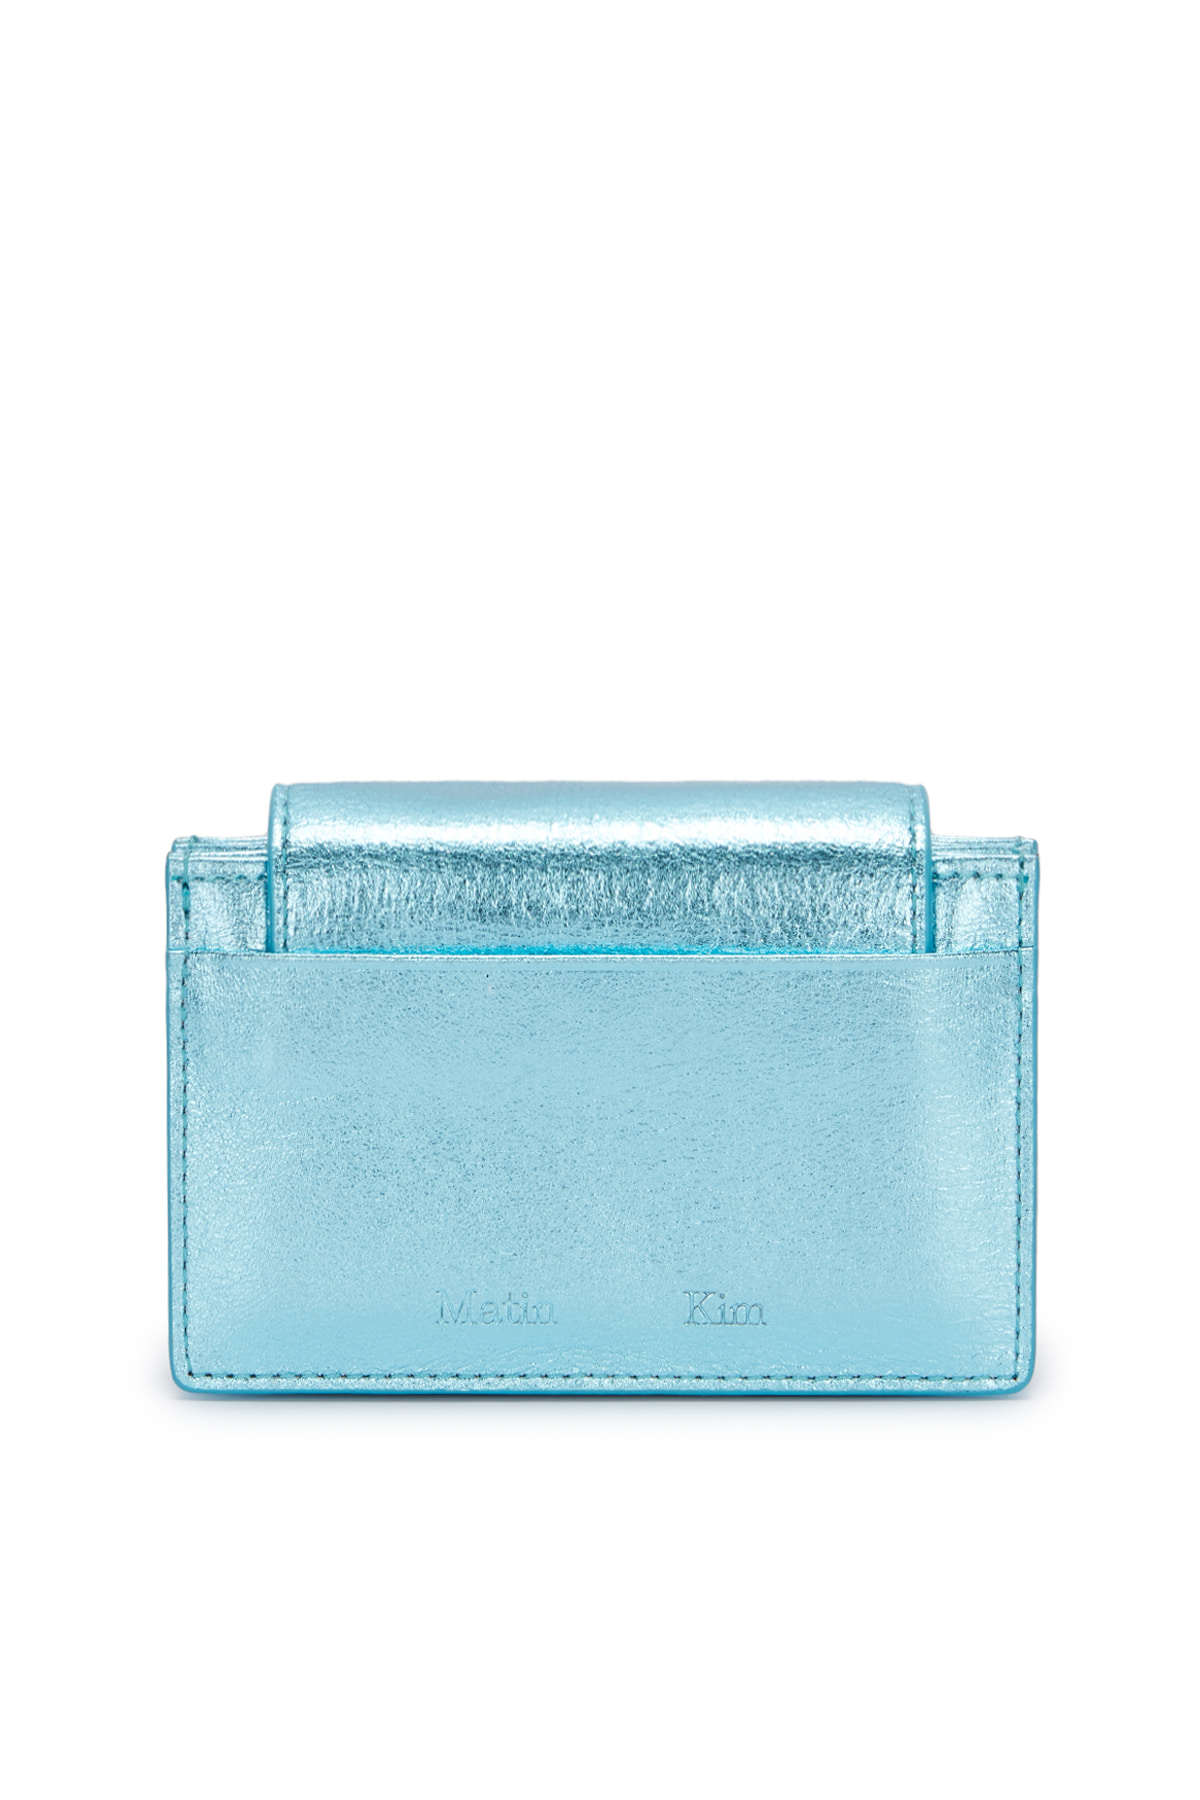 ACCORDION WALLET IN LIGHT BLUE